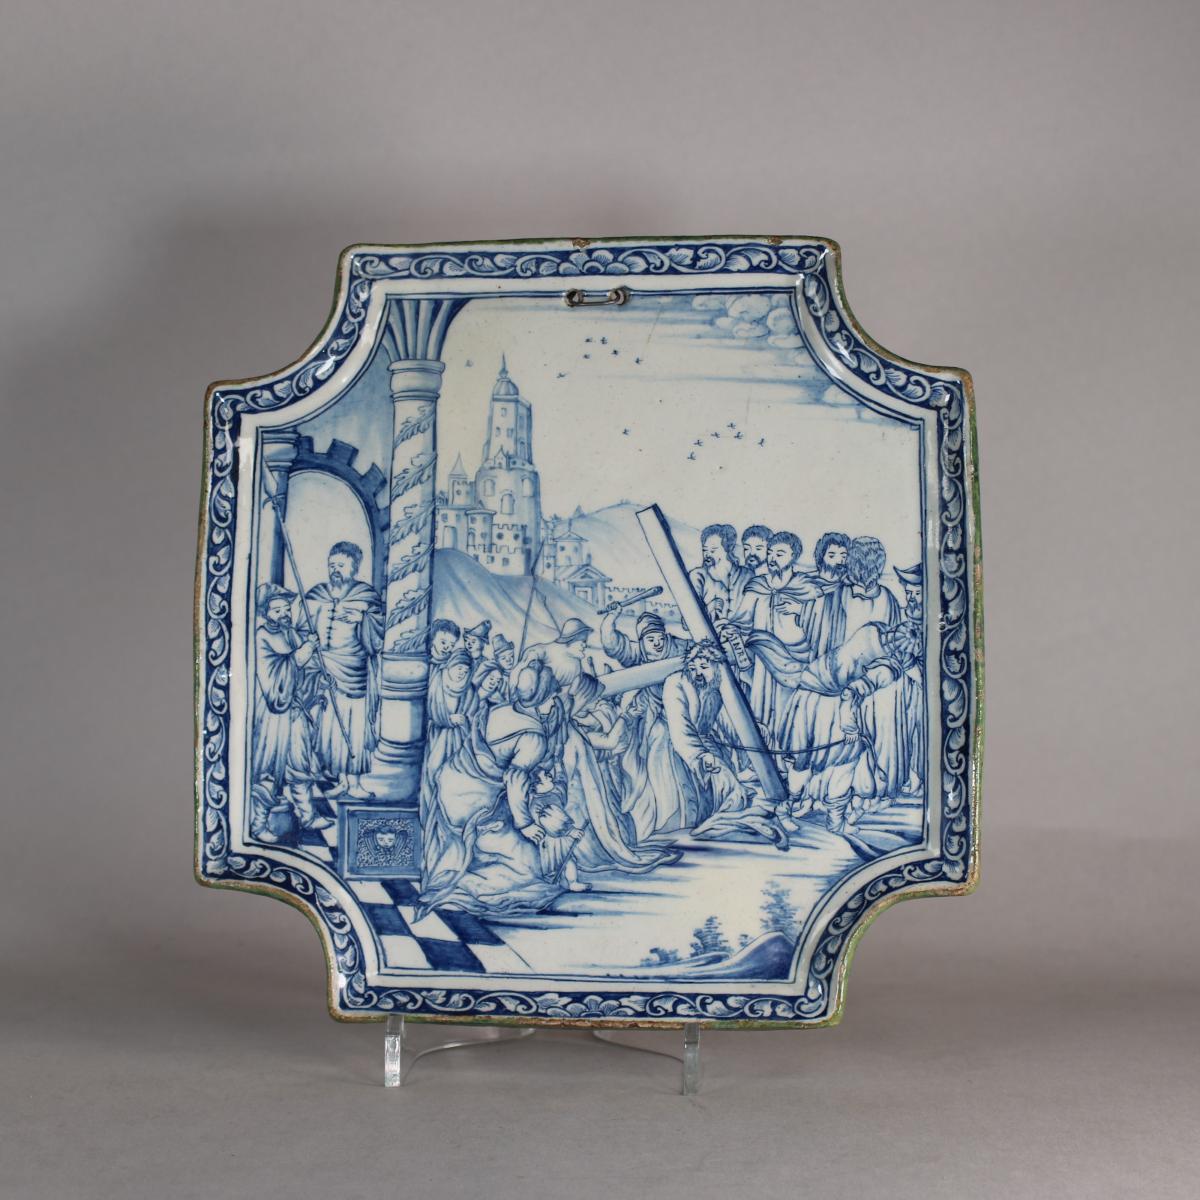 Pair of Dutch delft blue and white plaques